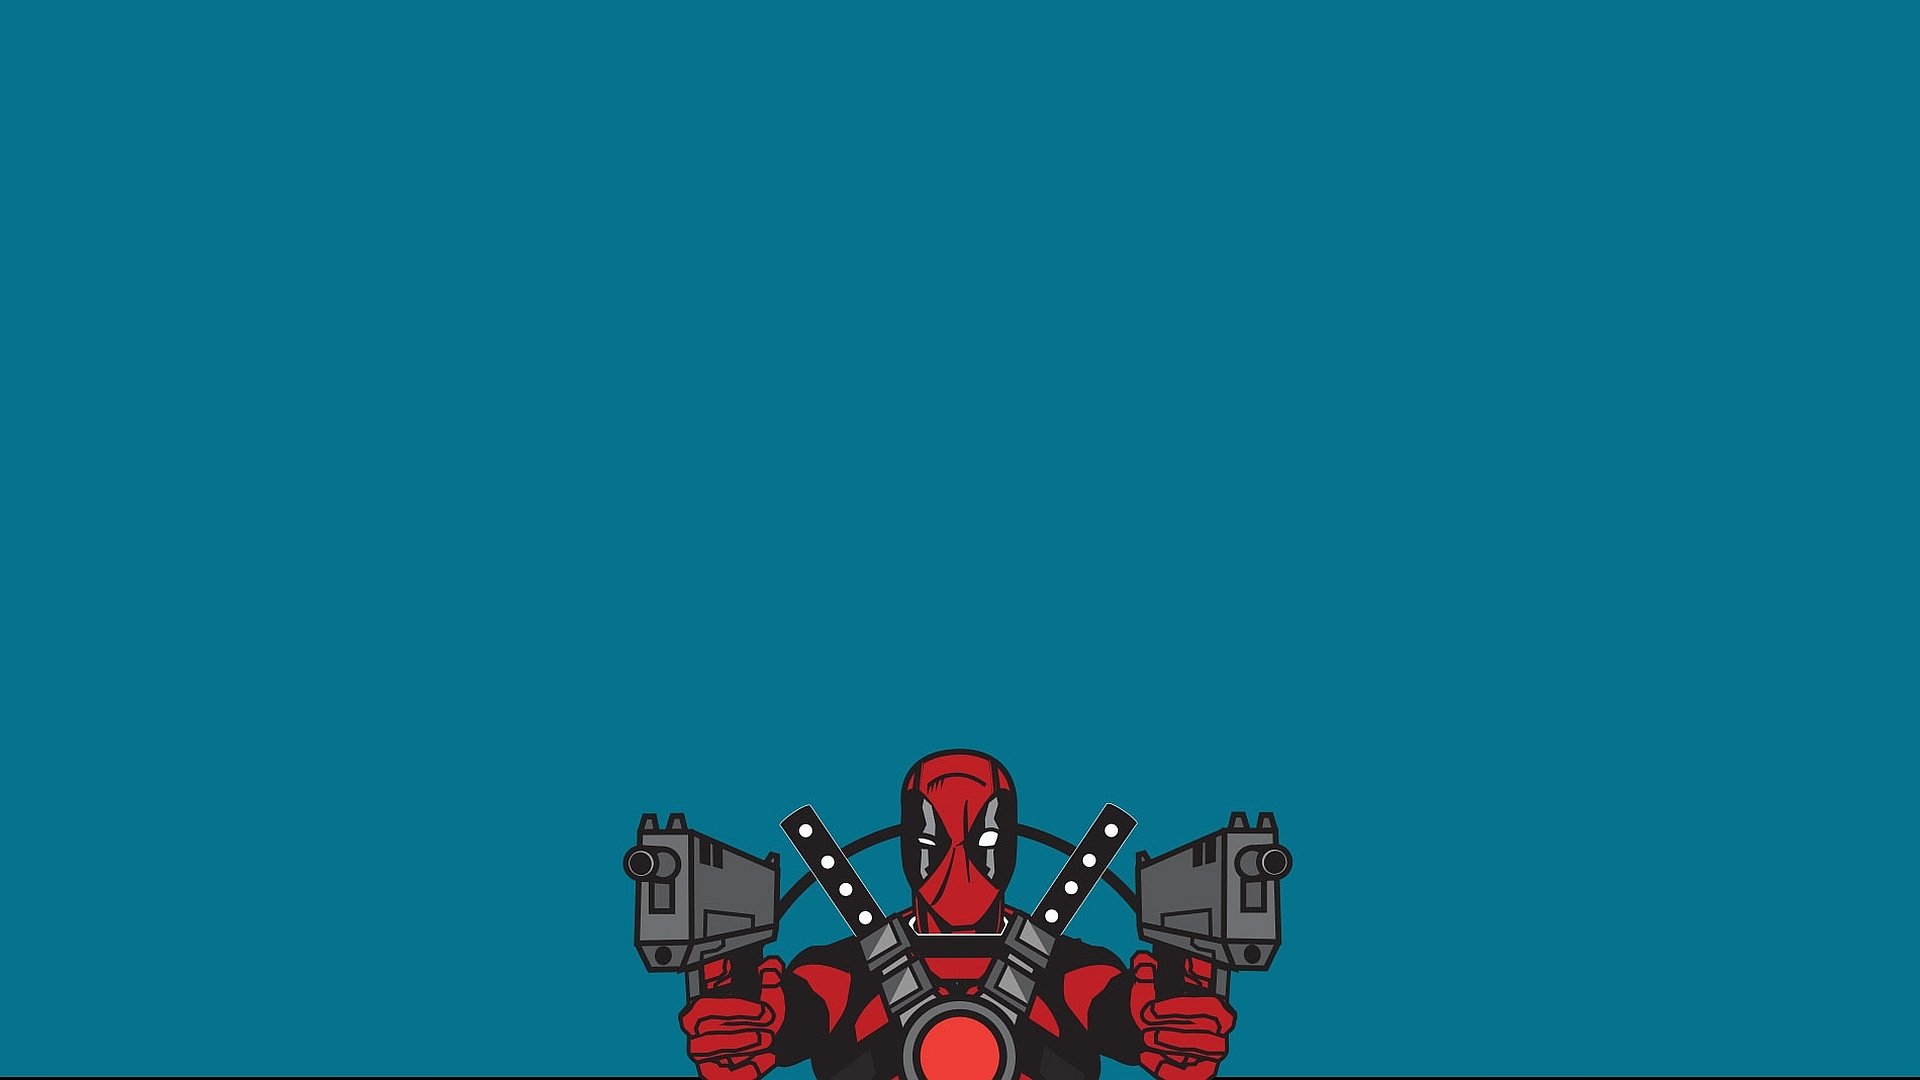 Download full hd 1920x1080 Deadpool PC background ID:350229 for free